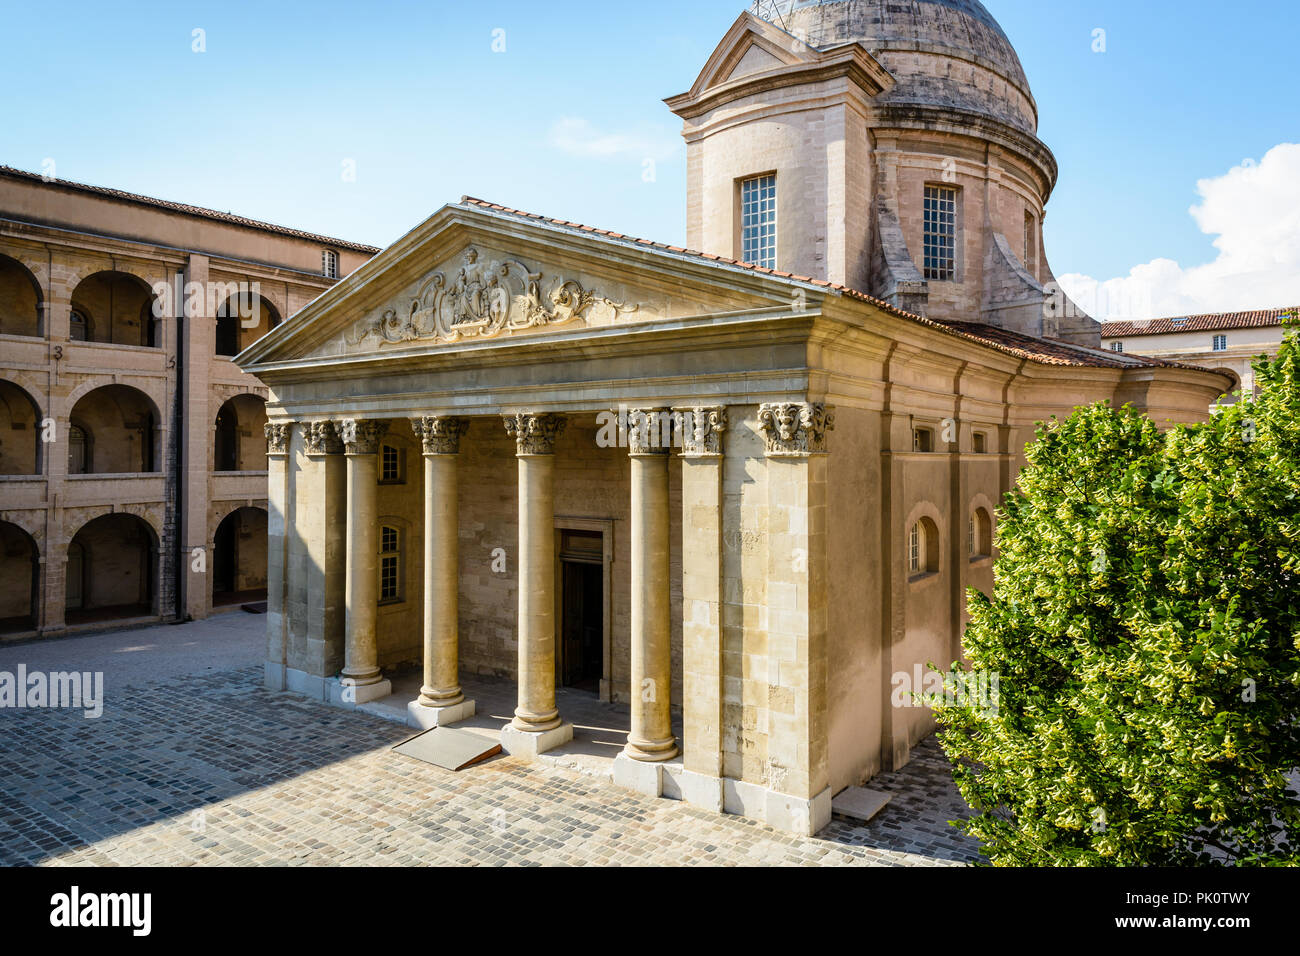 The chapel, its dome and classical style portico in the courtyard of La Vieille Charite in Marseille, France, and the arcaded galleries of the wings. Stock Photo